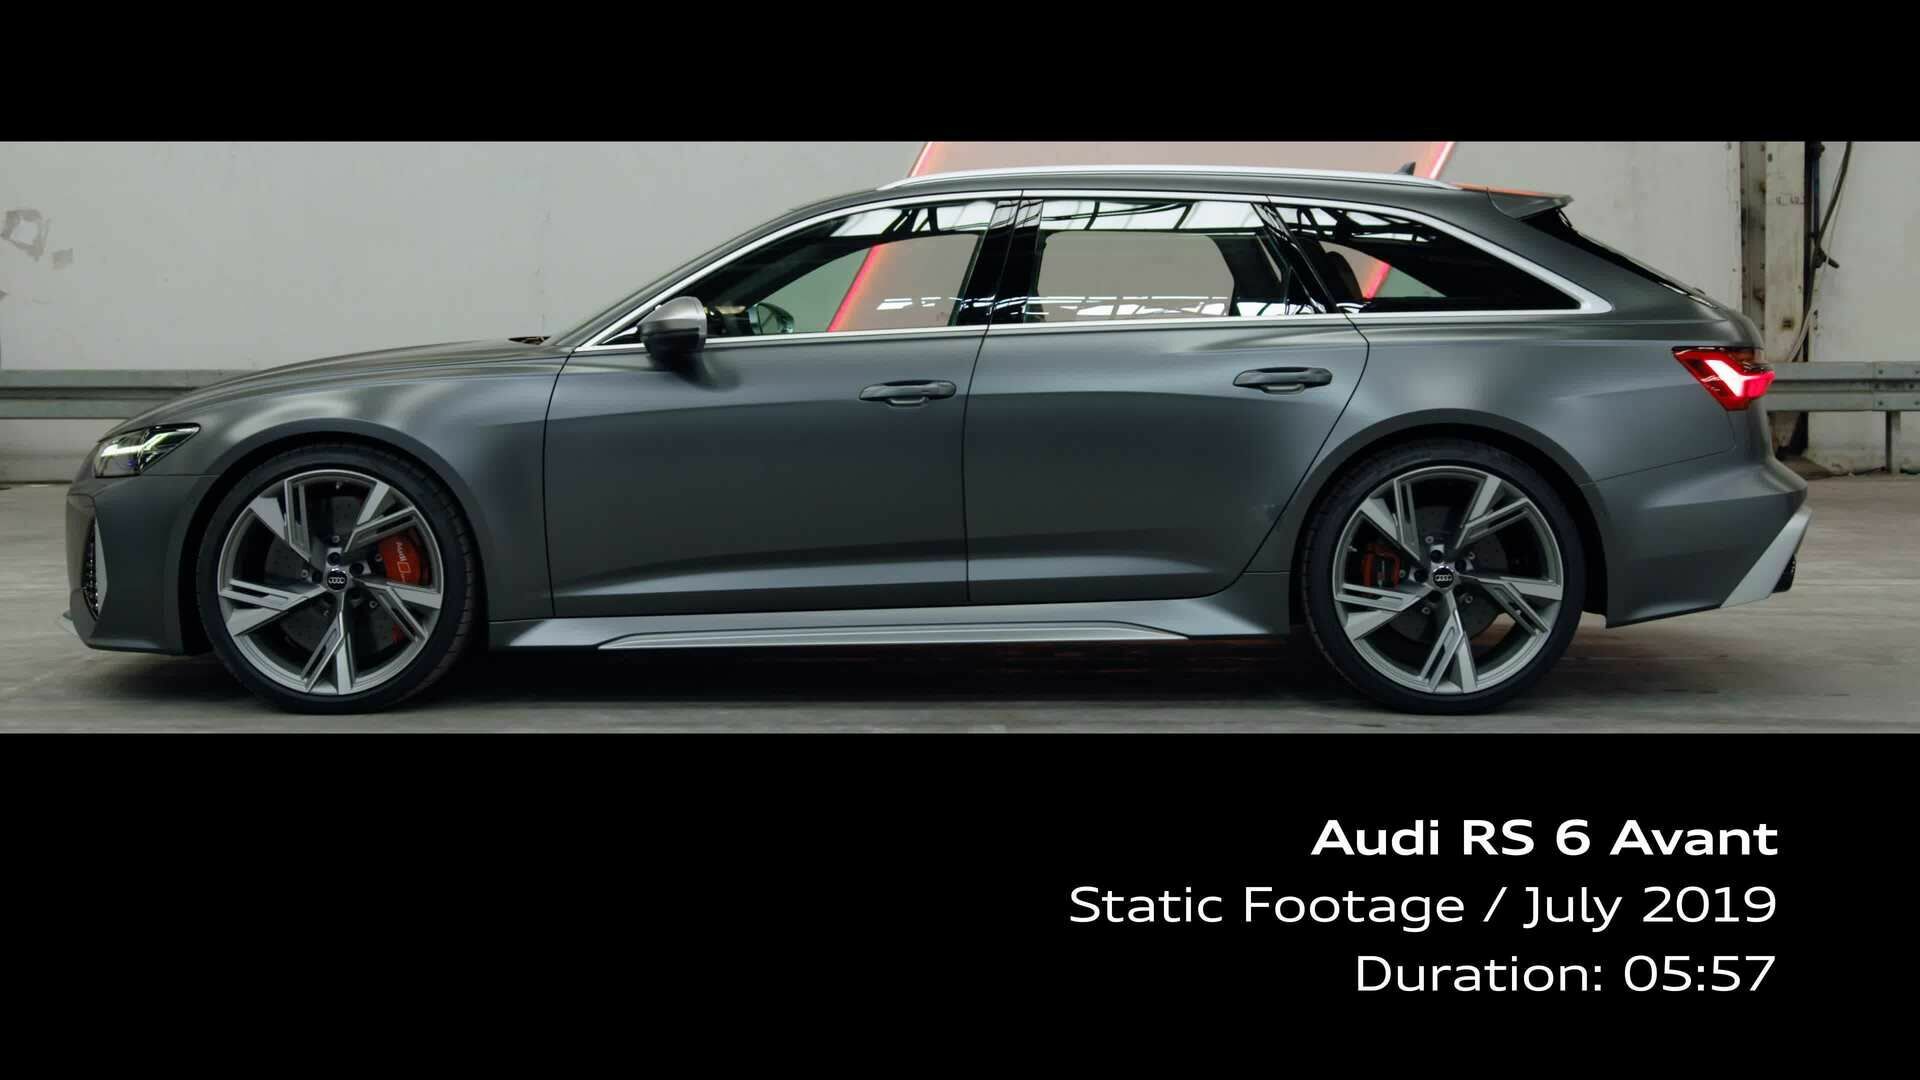 Audi RS 6 Avant statisches Footage